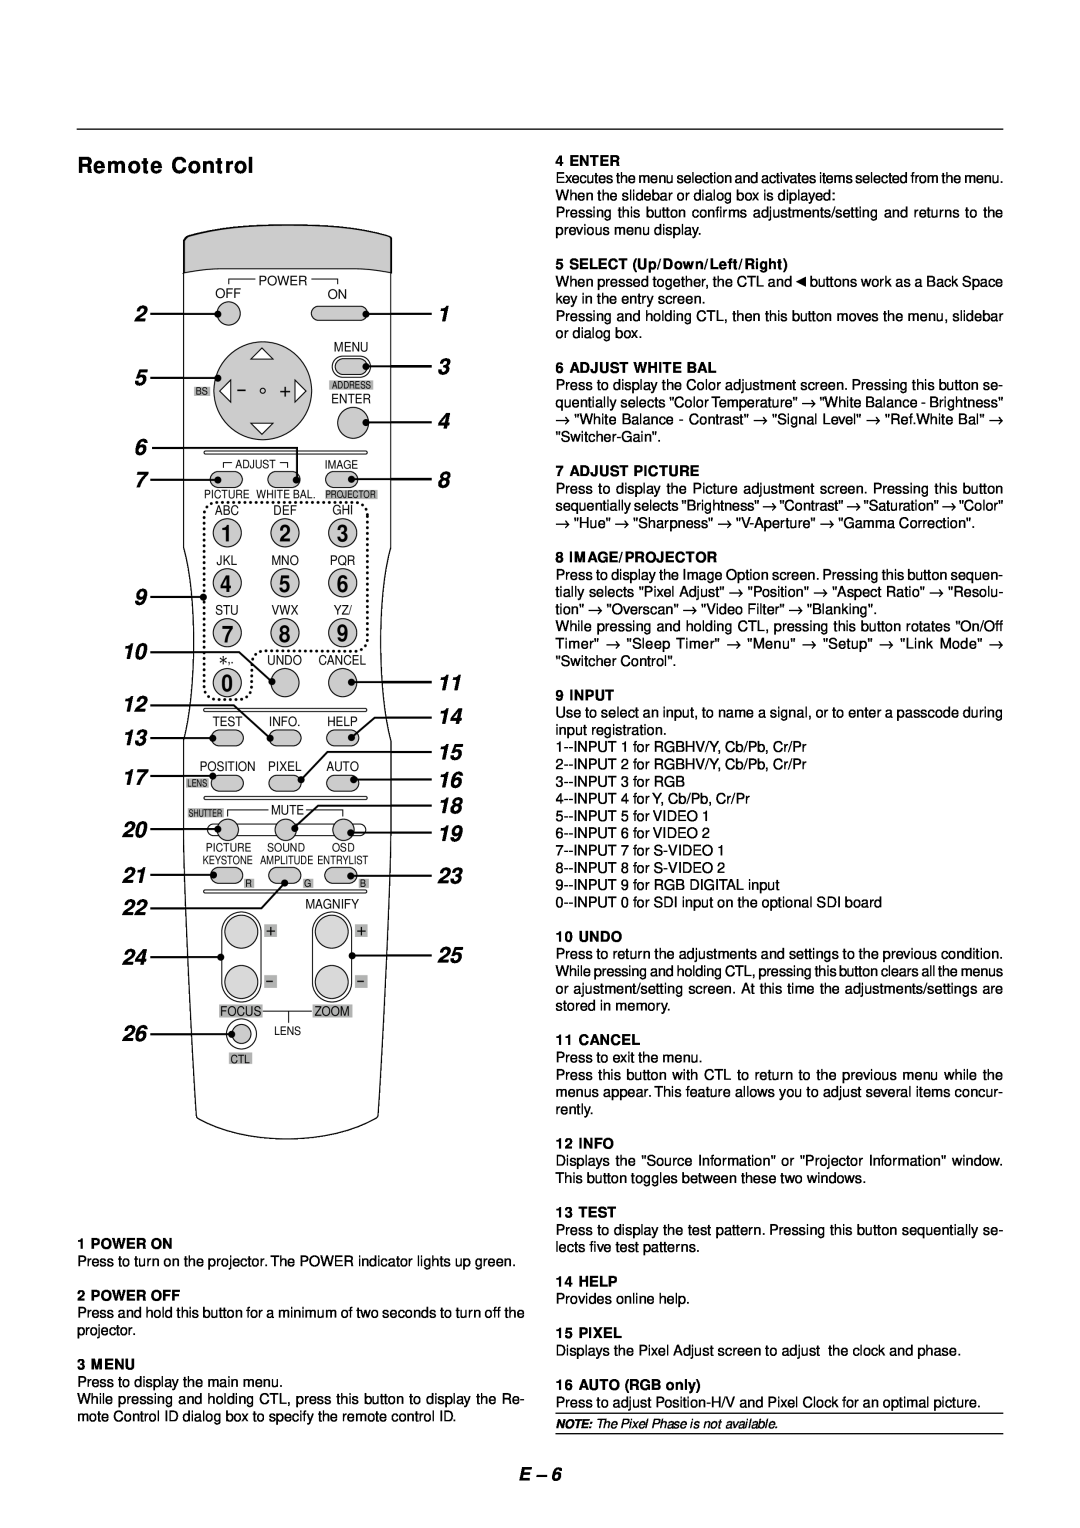 NEC SX4000 user manual Remote Control, NOTE The Pixel Phase is not available 